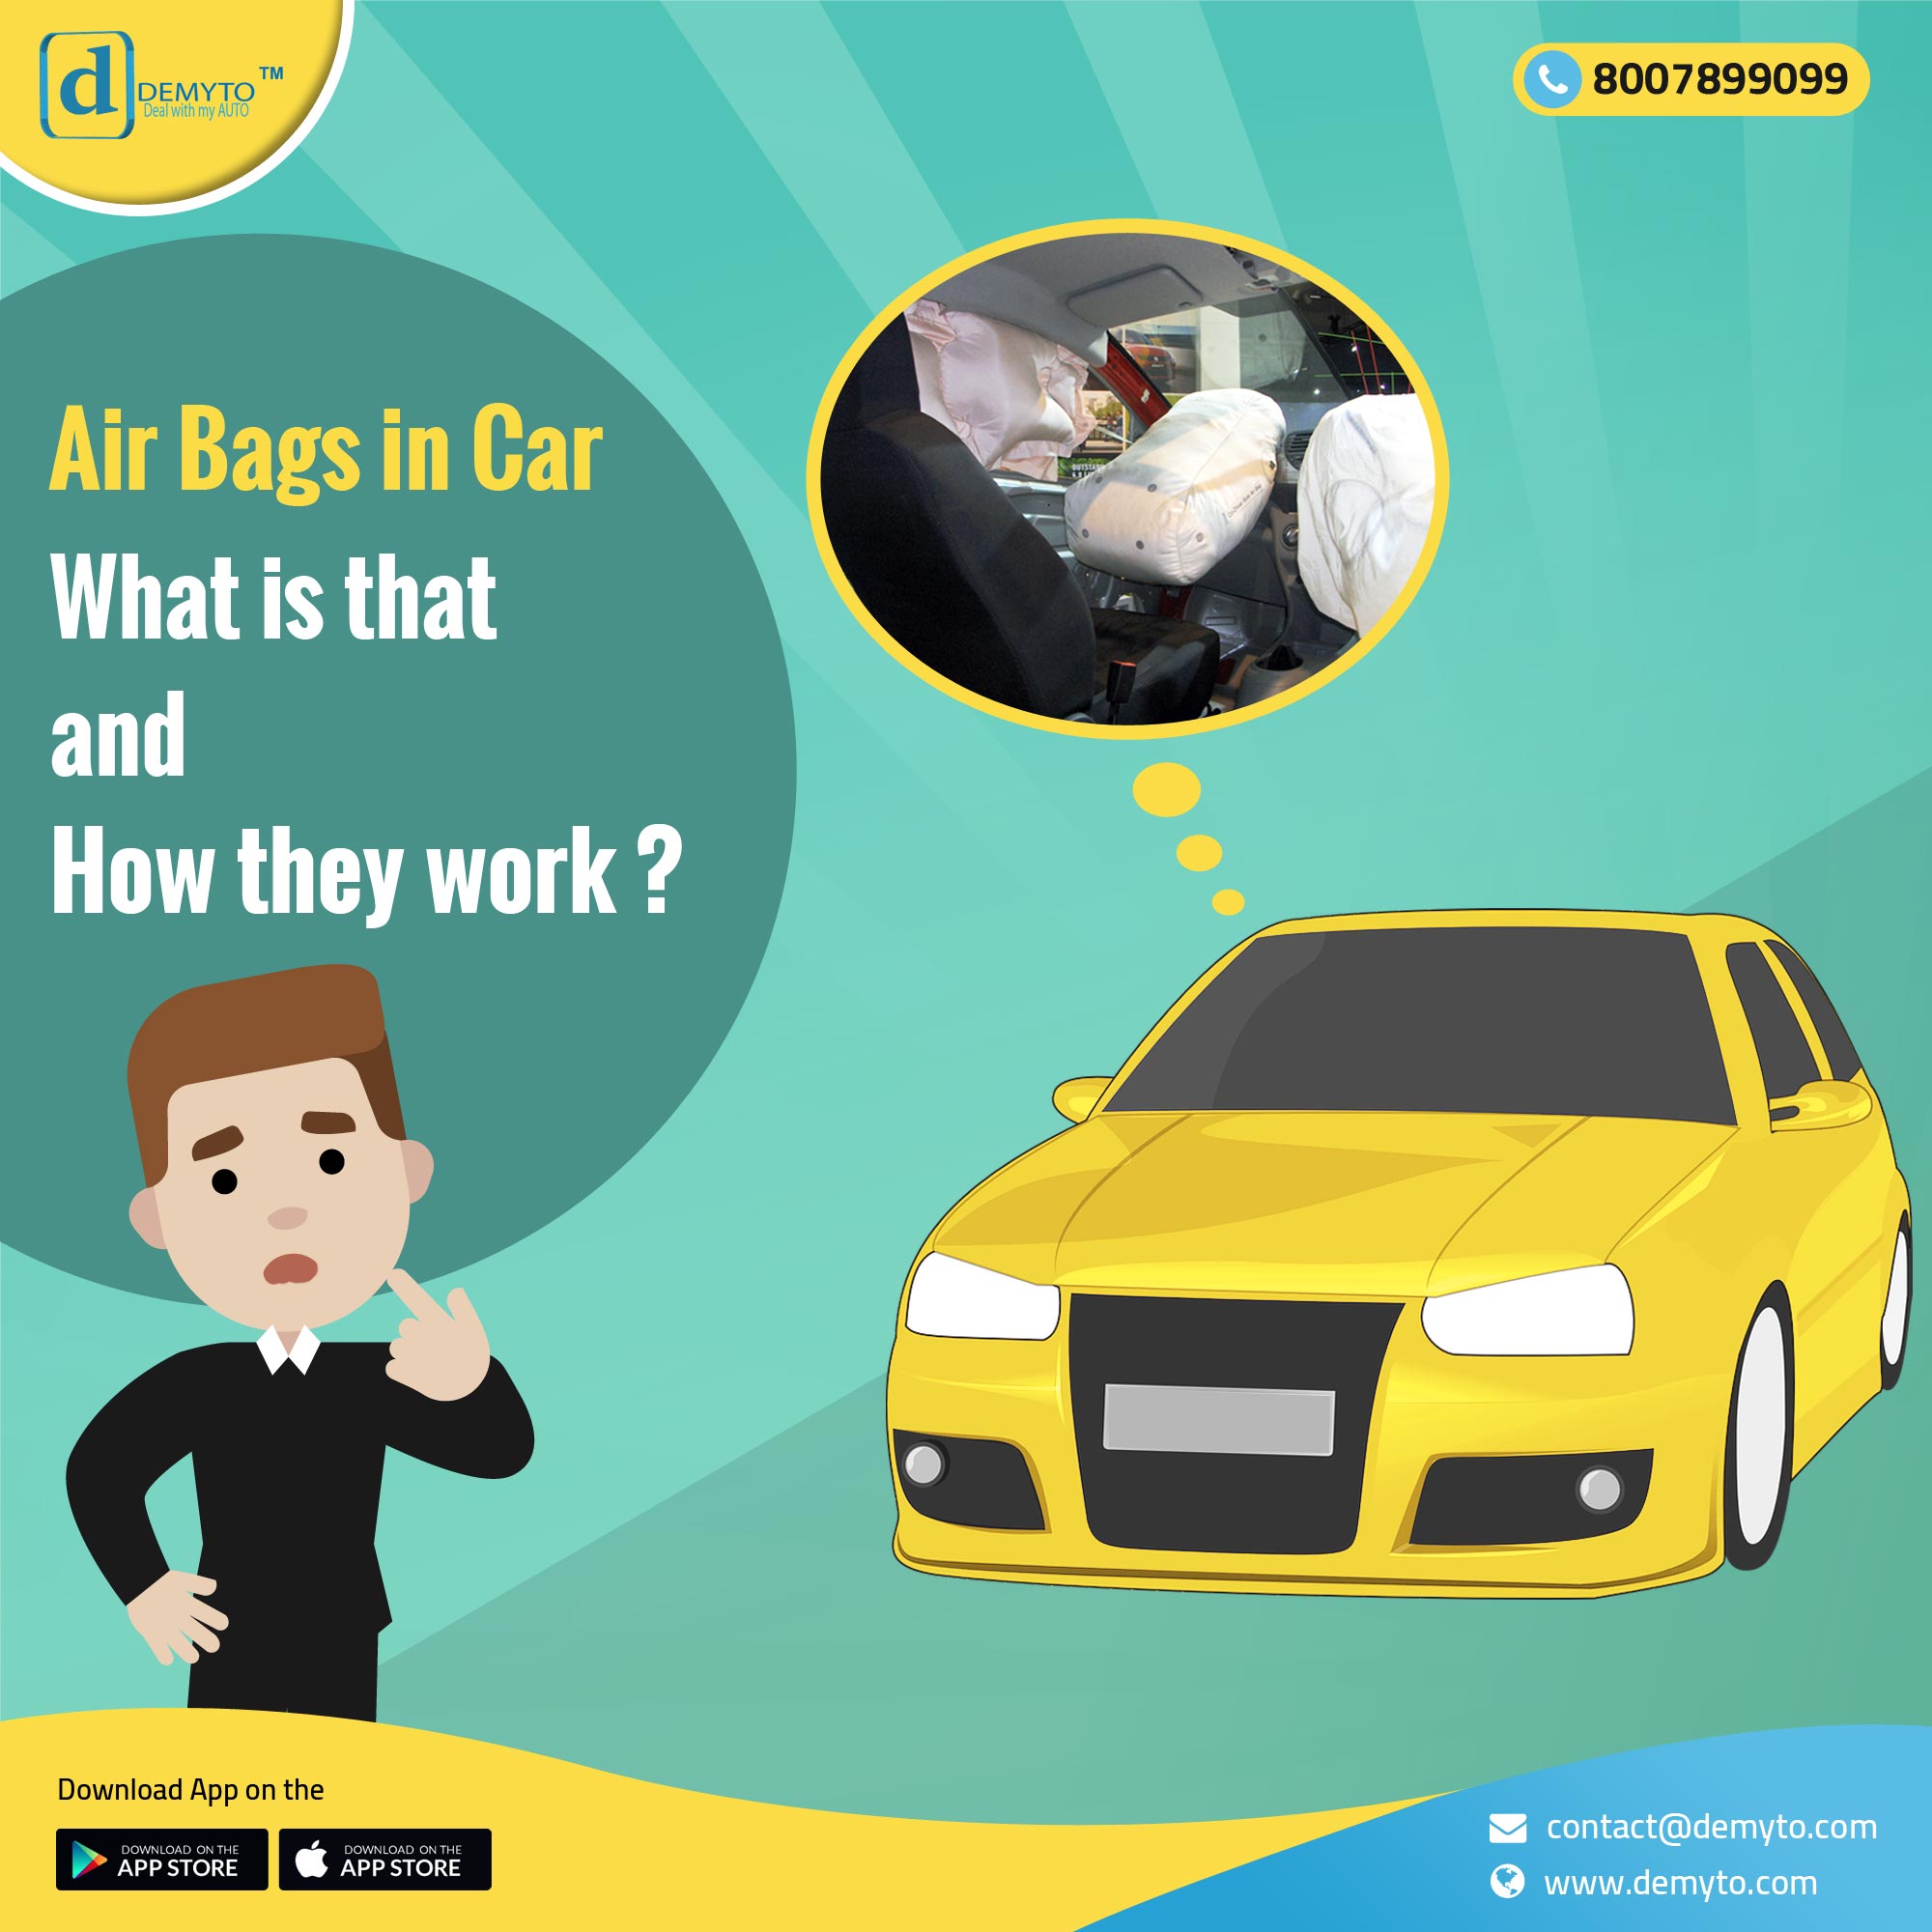 How can airbags be a life saver?